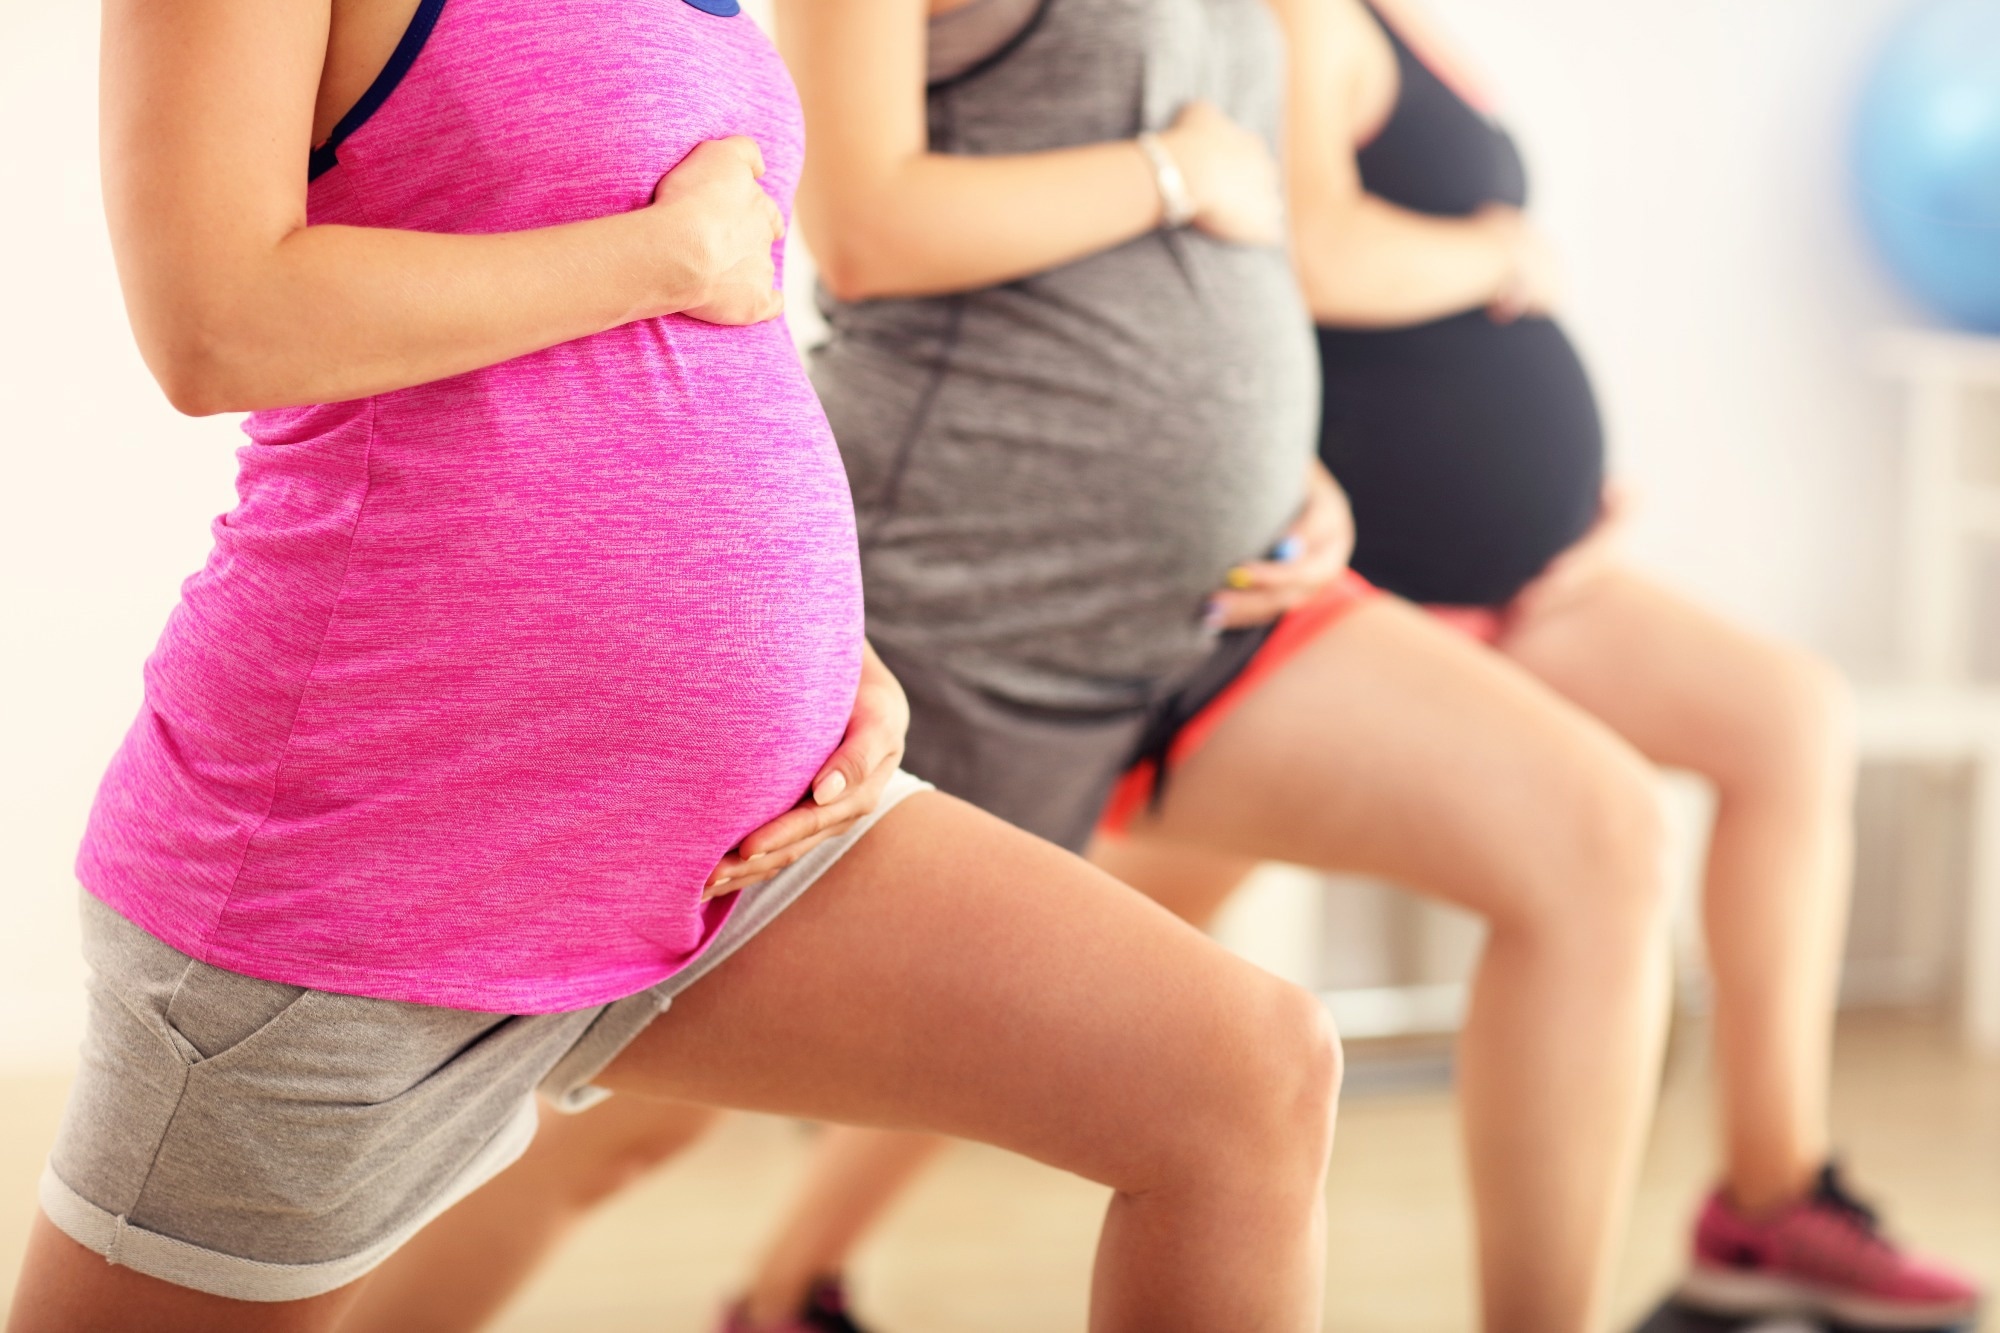 Approaches to improve the experience of exercise during pregnancy